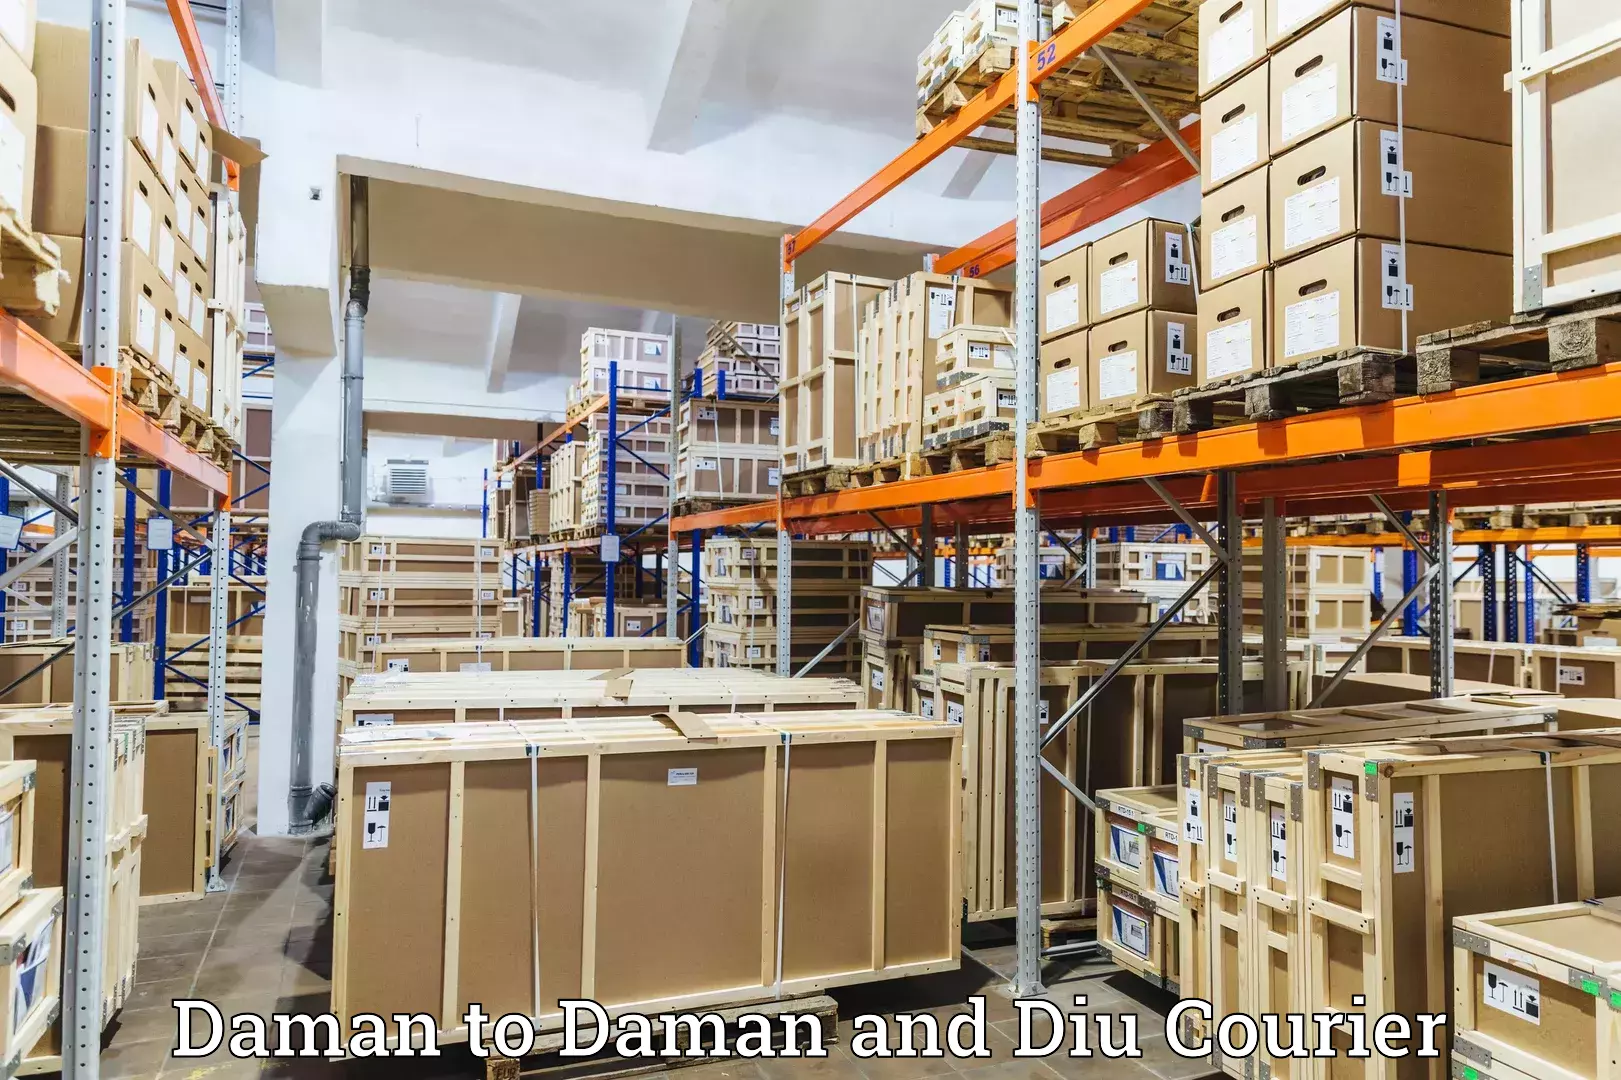 State-of-the-art courier technology Daman to Daman and Diu